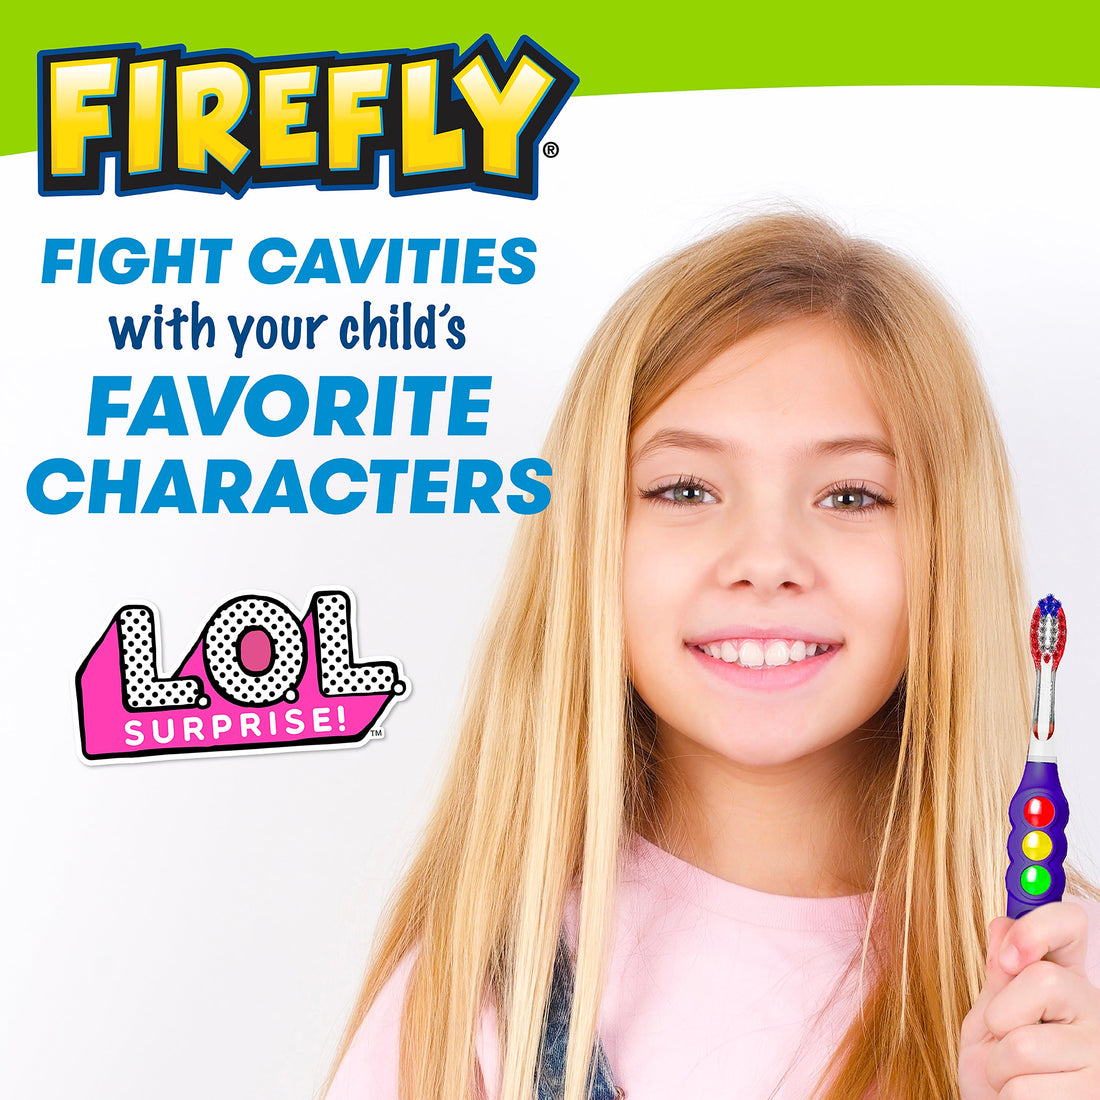 Child holding LOL Surprise Toothbrush. Fight cavities with your child&